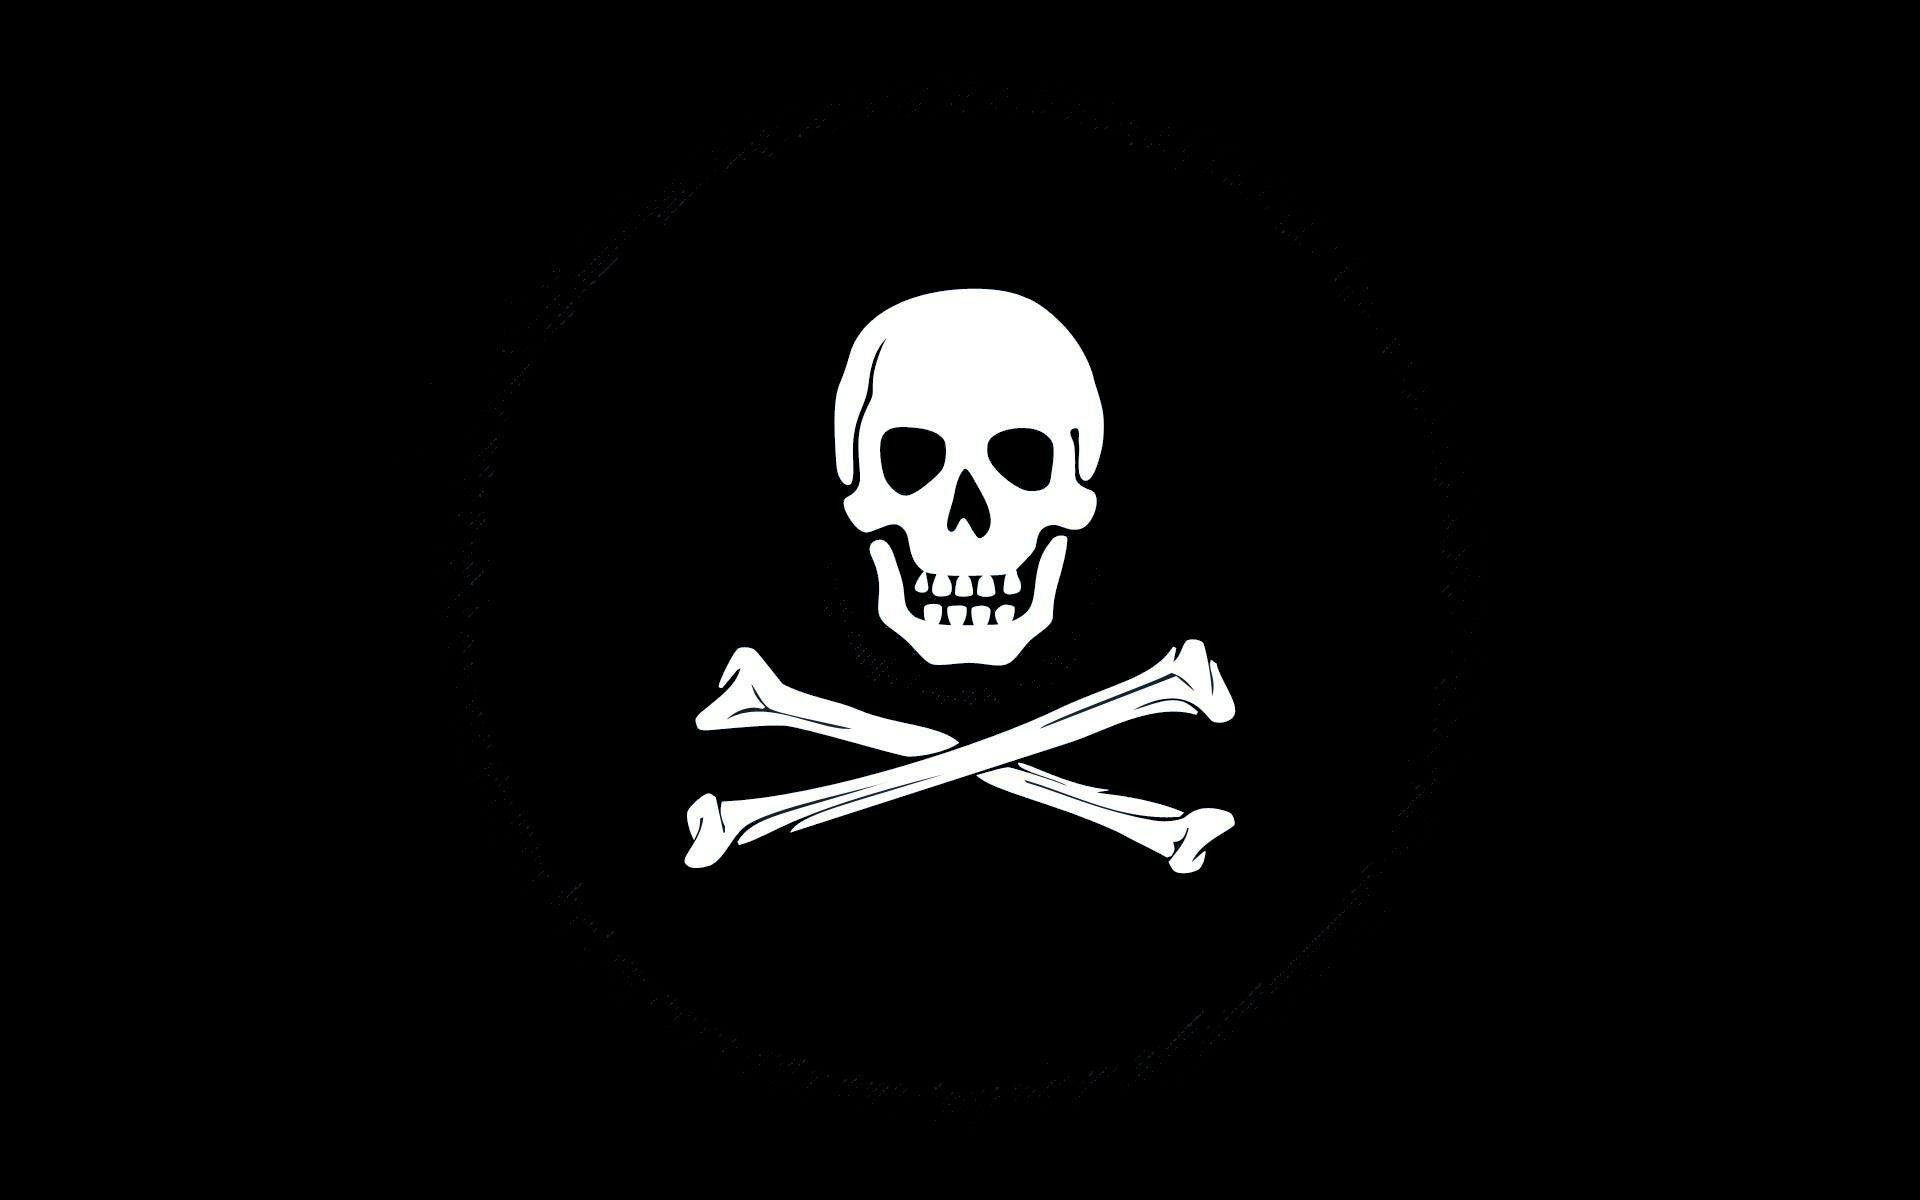 Heart Pirates Jolly Roger Wallpapers For Free, Heart Pirates Jolly Roger, Anime